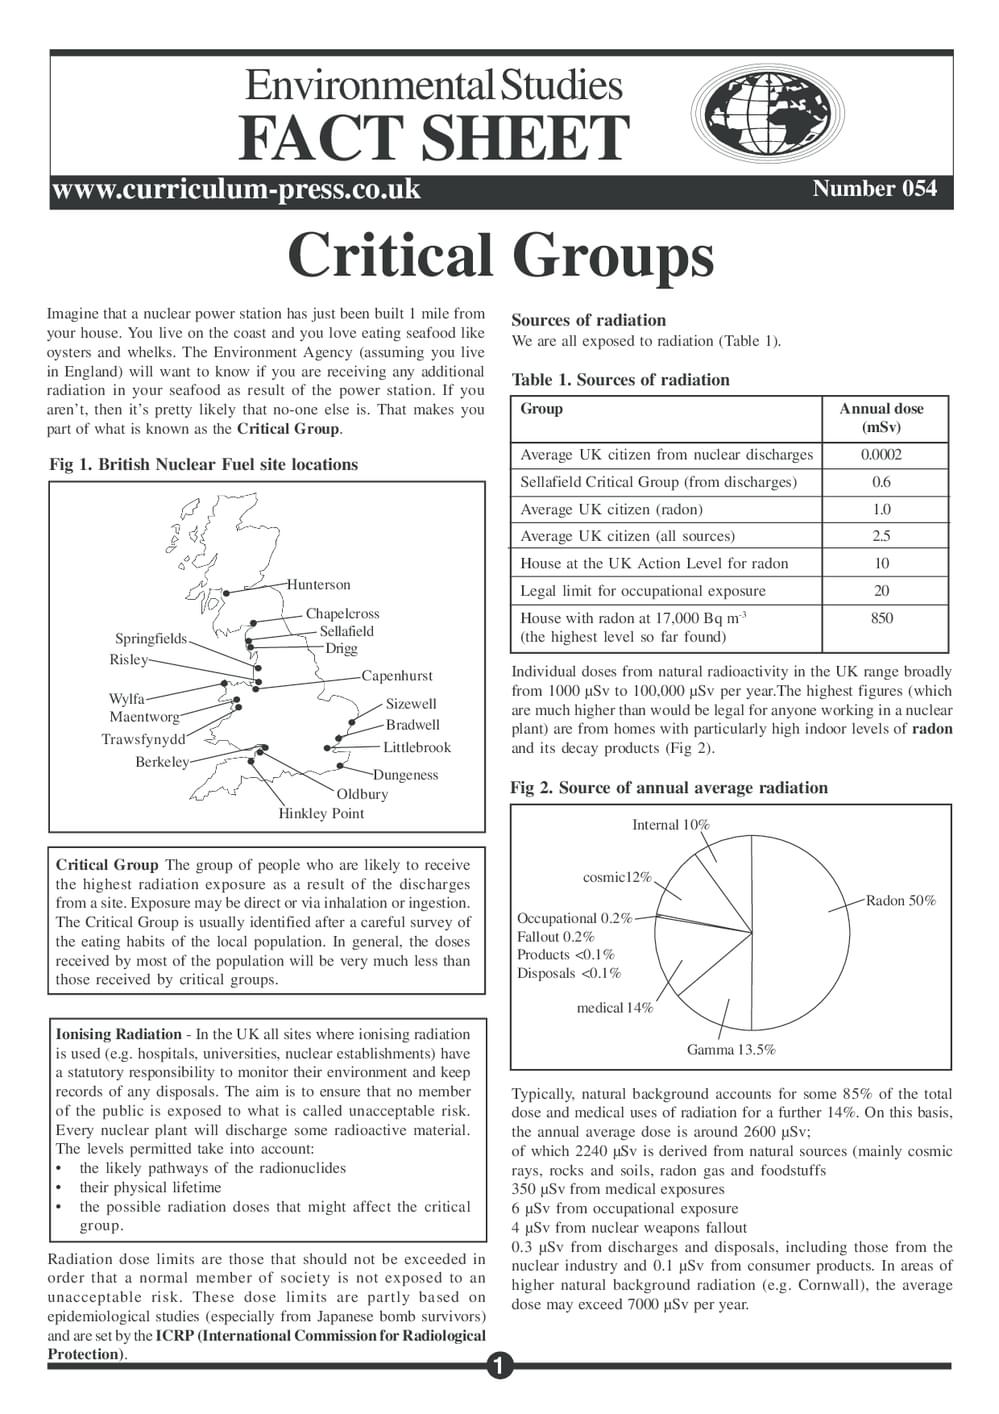 54 Critical Groups